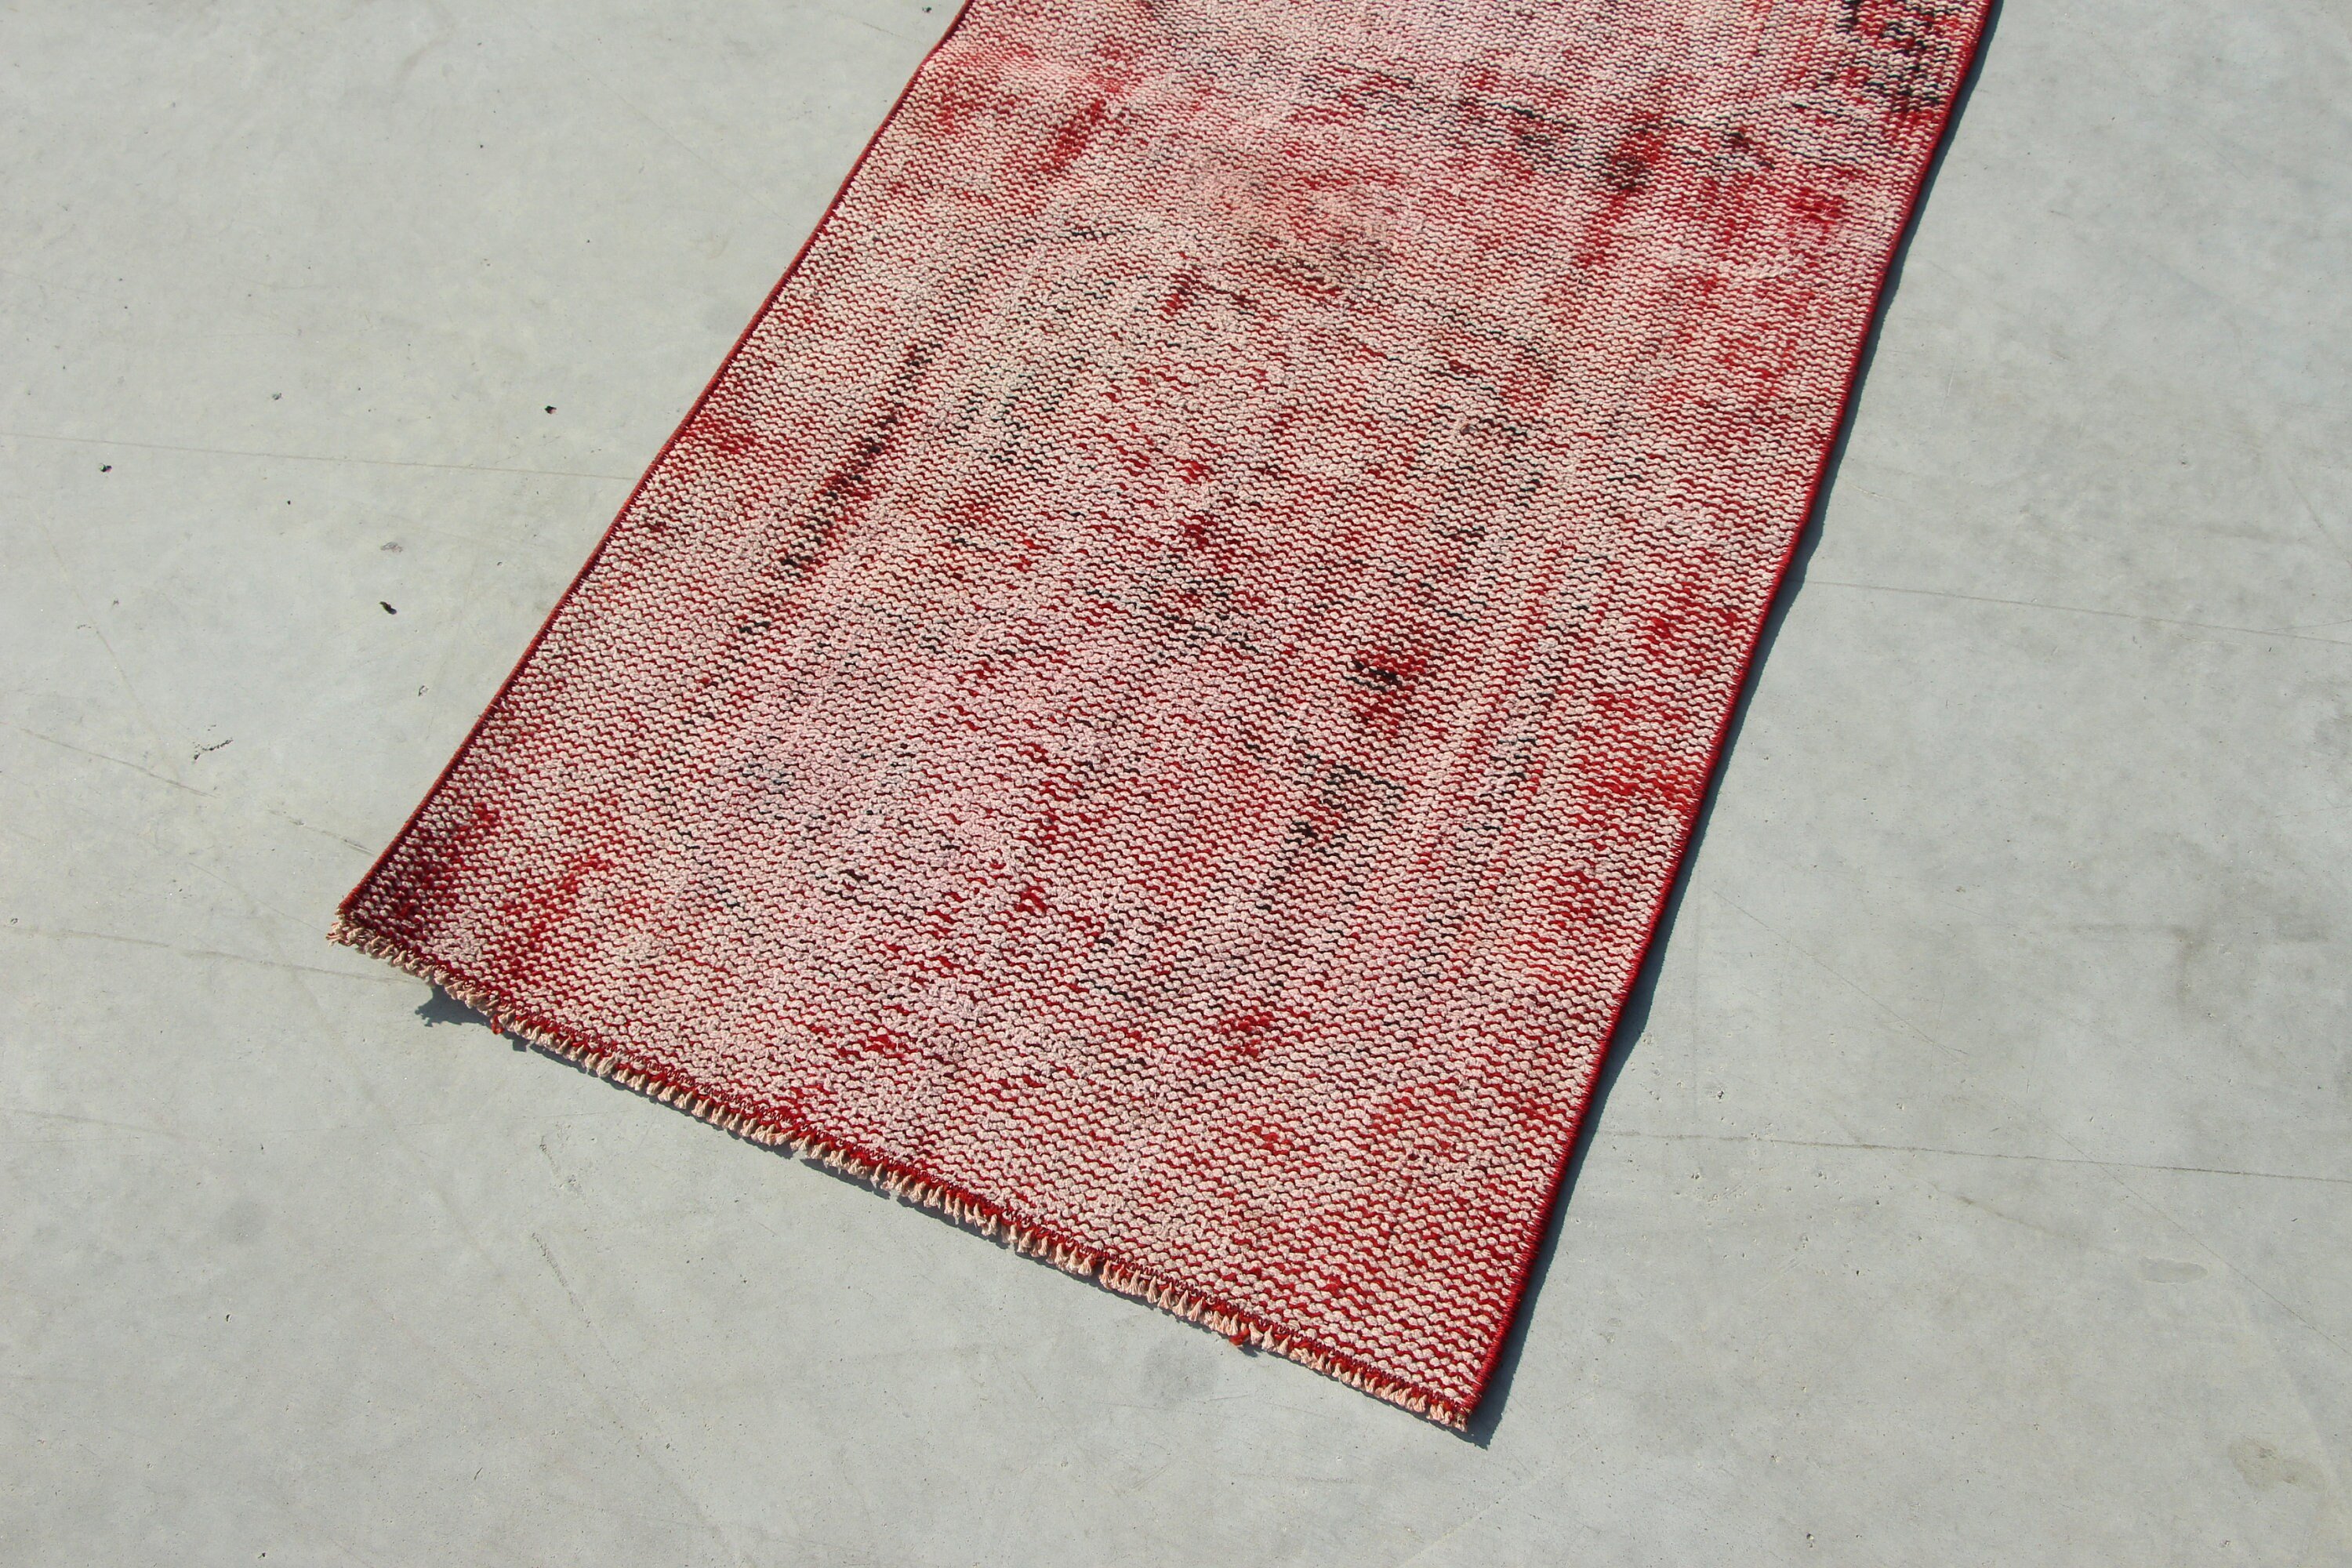 Oriental Rug, Red Home Decor Rug, 2.3x5 ft Small Rugs, Oushak Rugs, Vintage Rugs, Door Mat Rug, Turkish Rugs, Organic Rugs, Kitchen Rugs